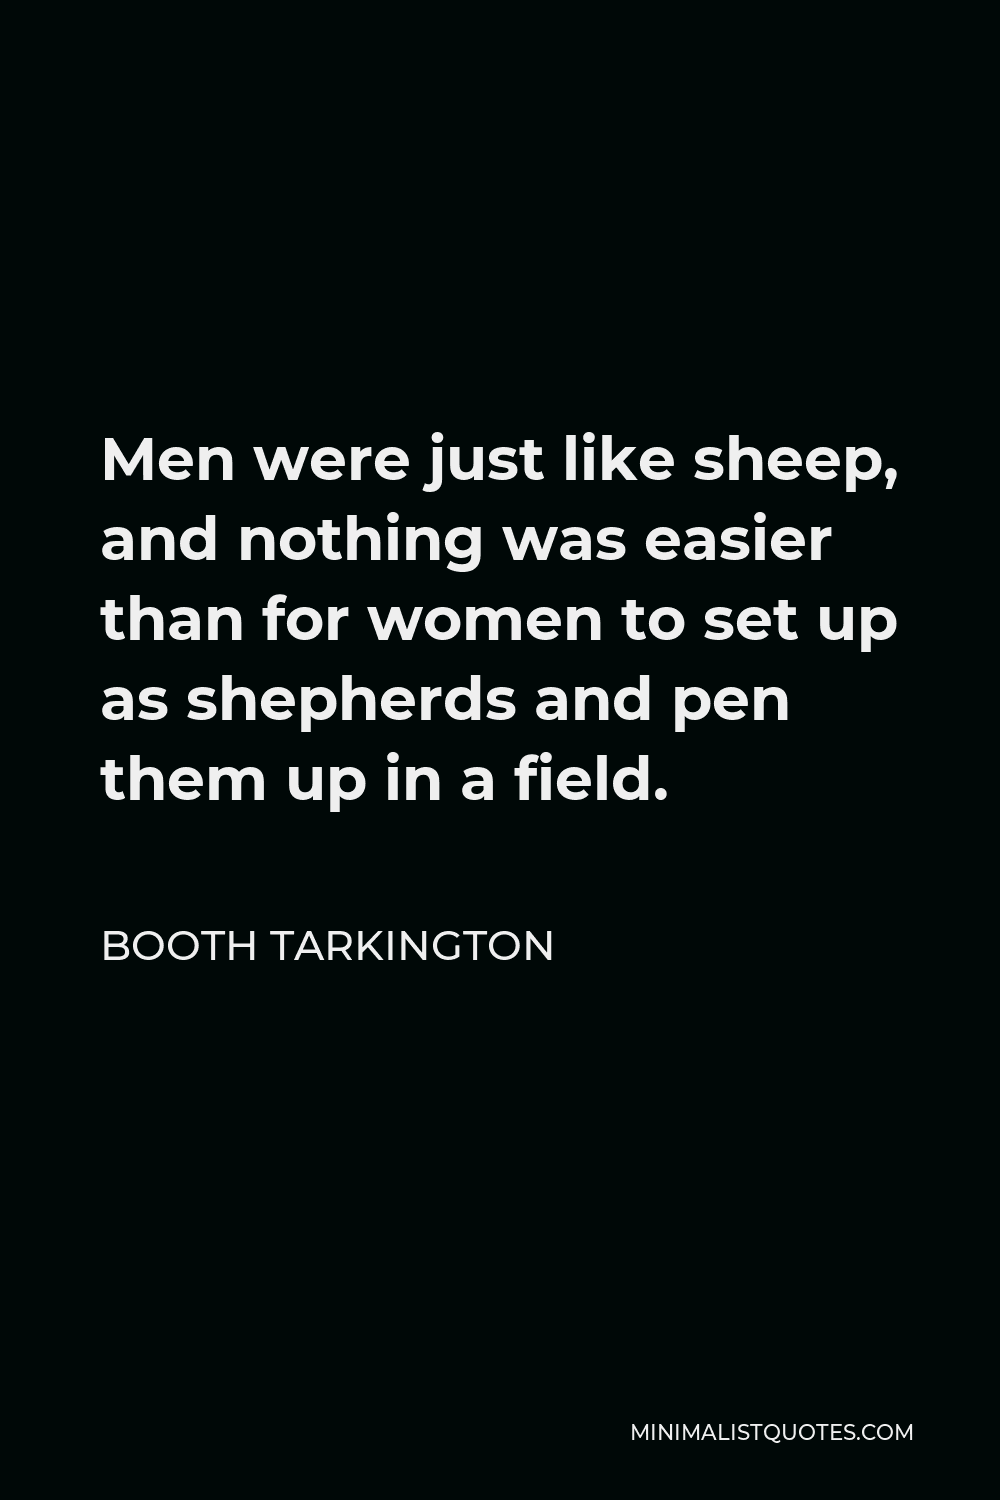 Booth Tarkington Quote - Men were just like sheep, and nothing was easier than for women to set up as shepherds and pen them up in a field.